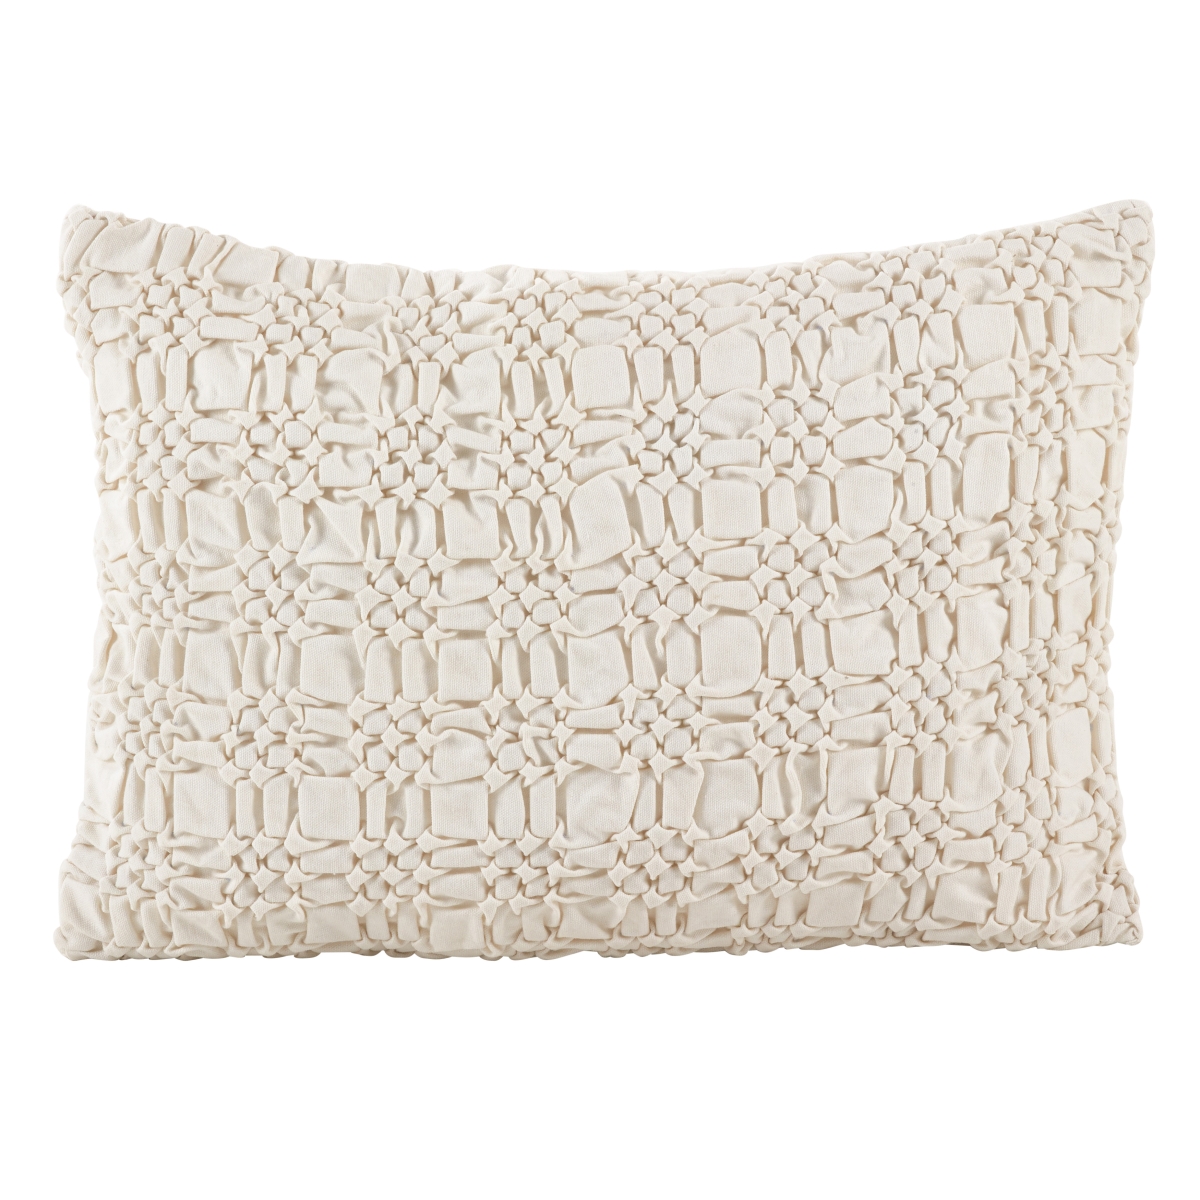 0002.i1420b 14 X 20 In. Smocked Design Decorative Accent Cotton Down Filled Throw Pillow, Ivory